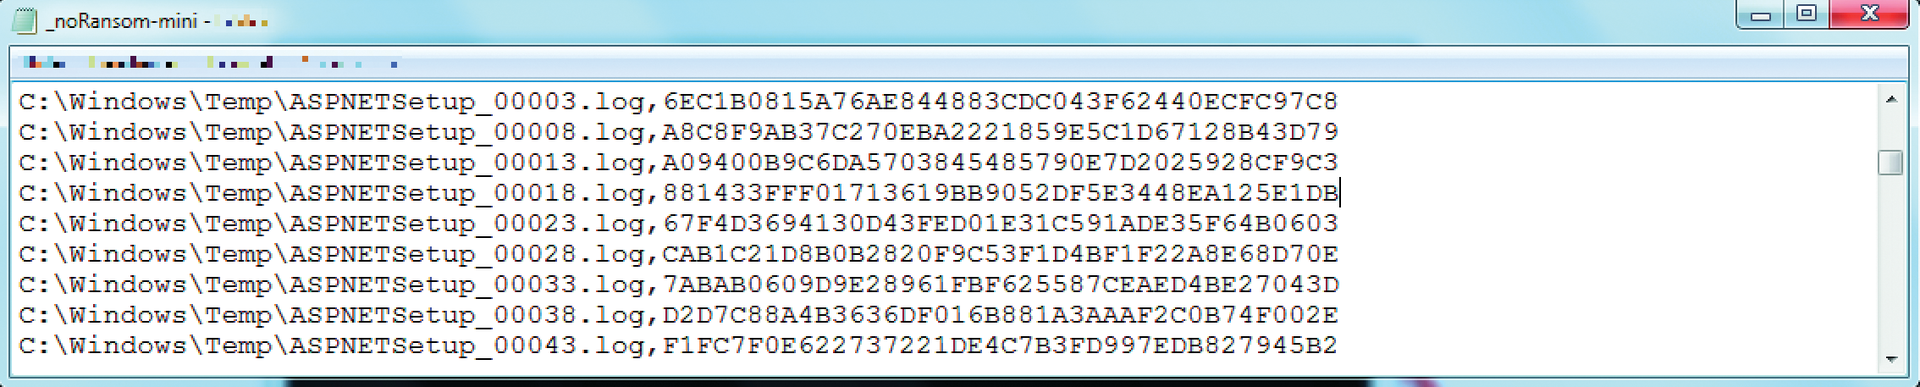 Bait files with checksums are found in the _noRansom-mini.txt file. 